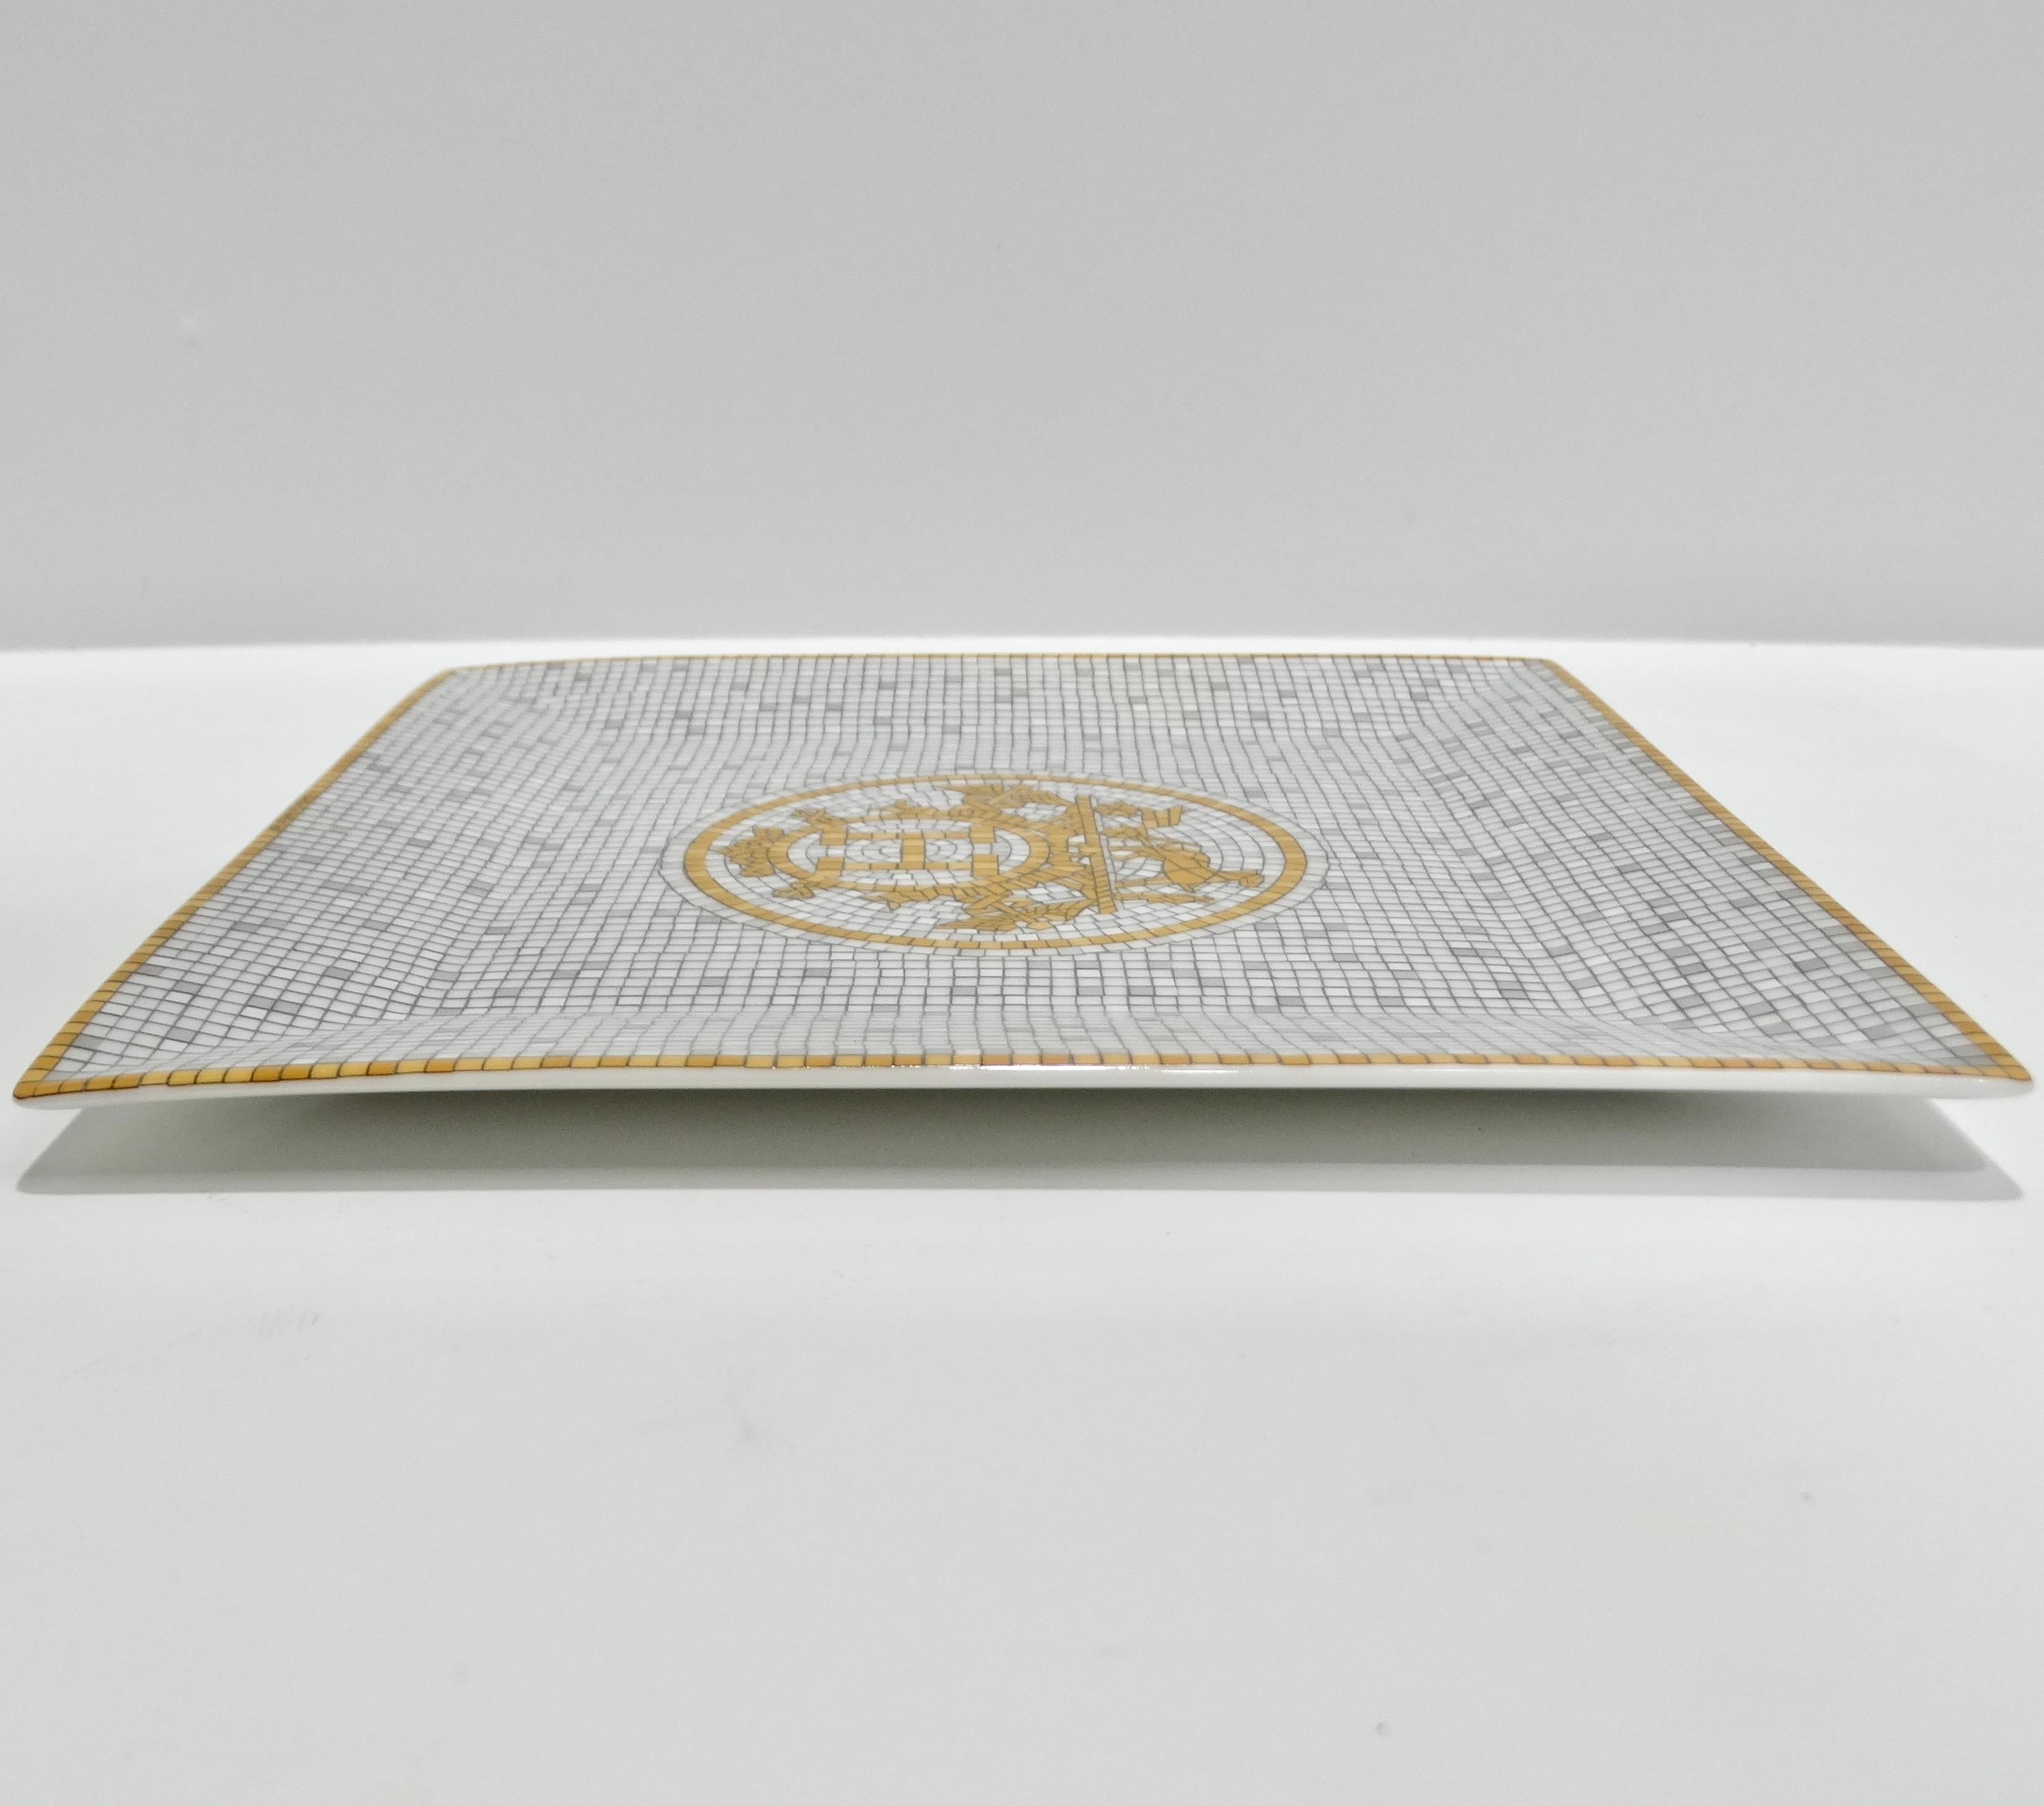 Hermes Mosaique Square Plate For Sale 4